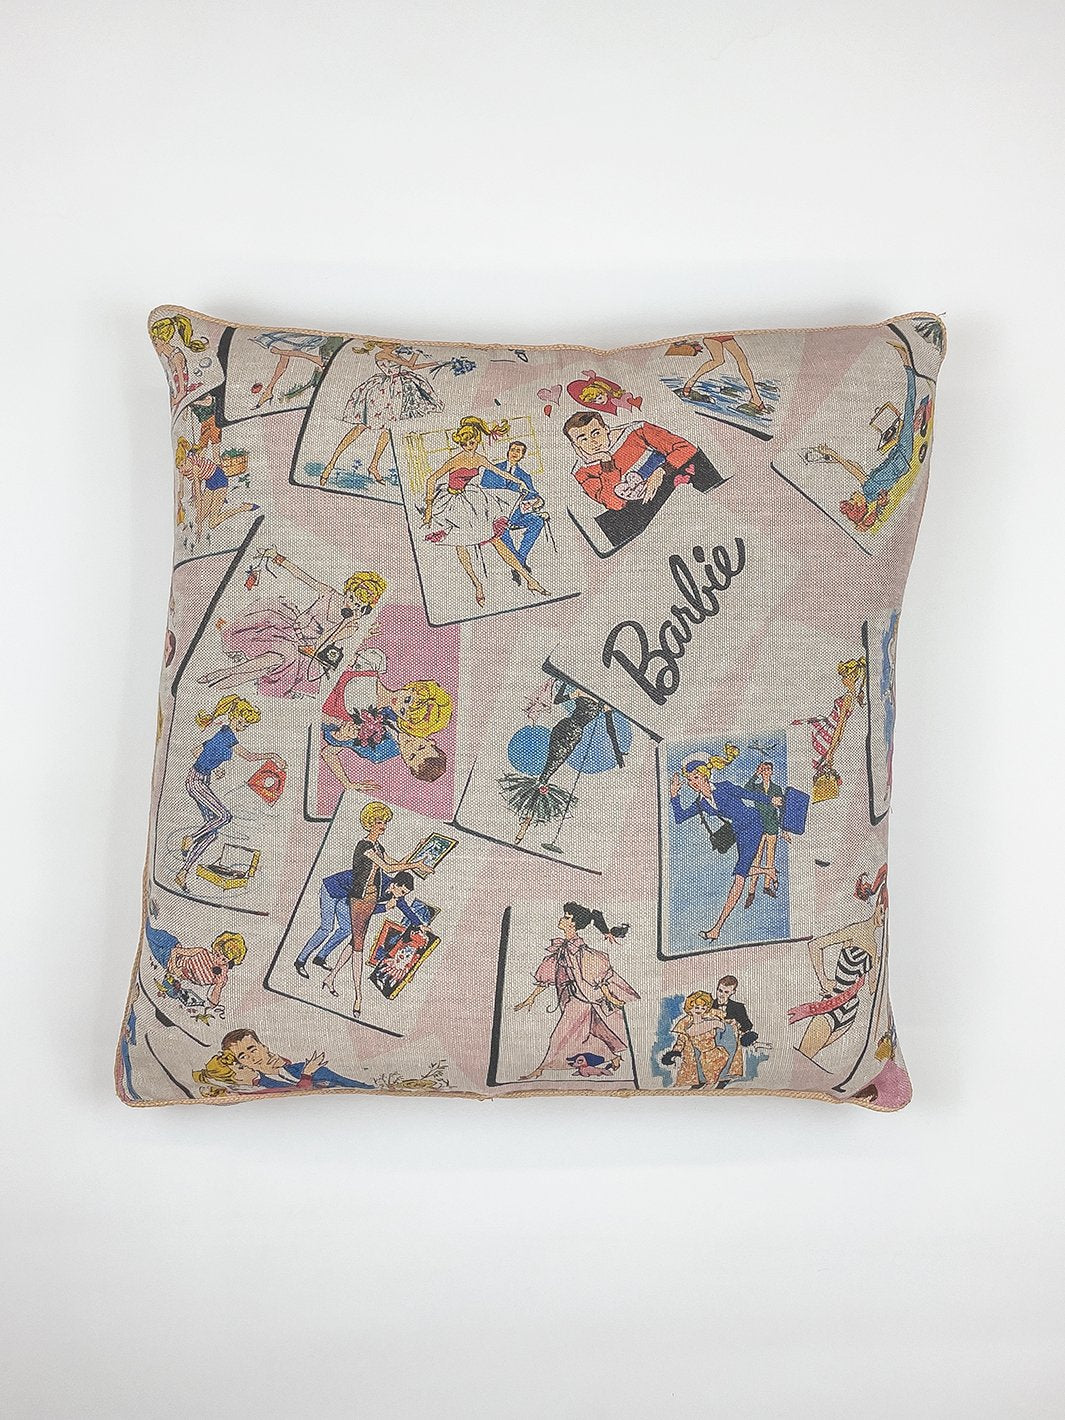 'Barbie™ Trading Cards' Throw Pillow - Pink on Flax Linen